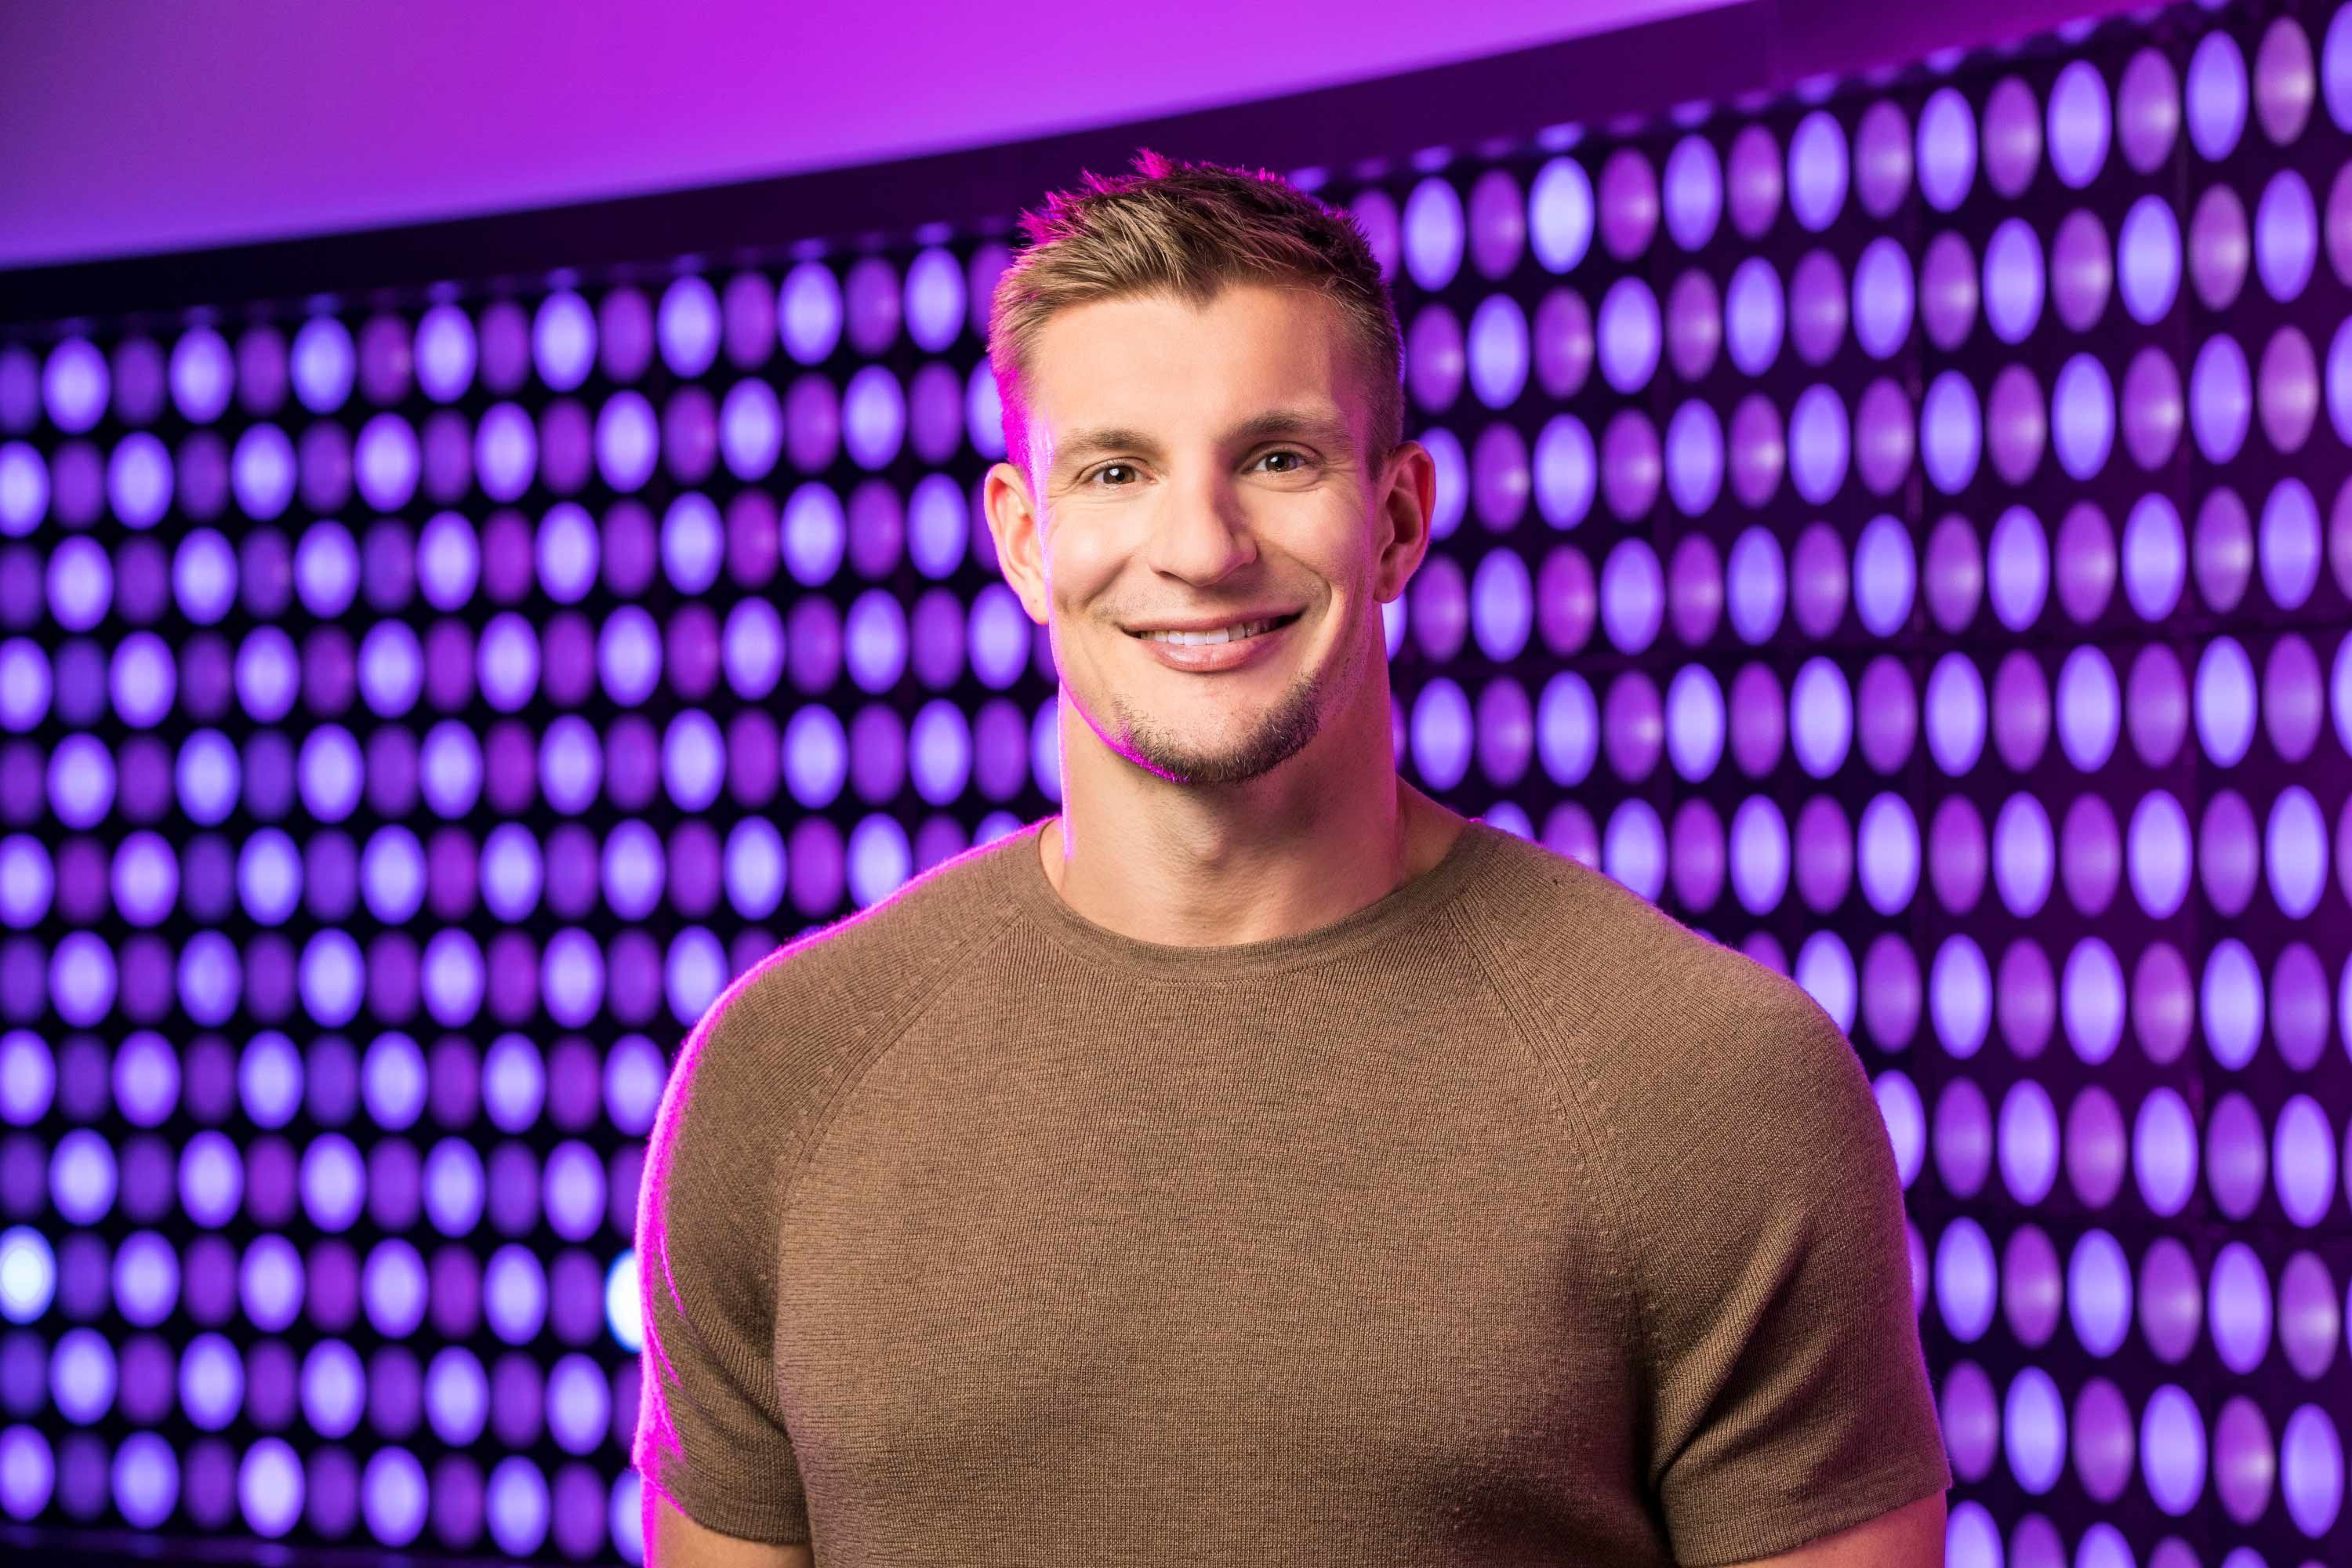 Rob Gronkowski of the show Game On! smiles at the camera.